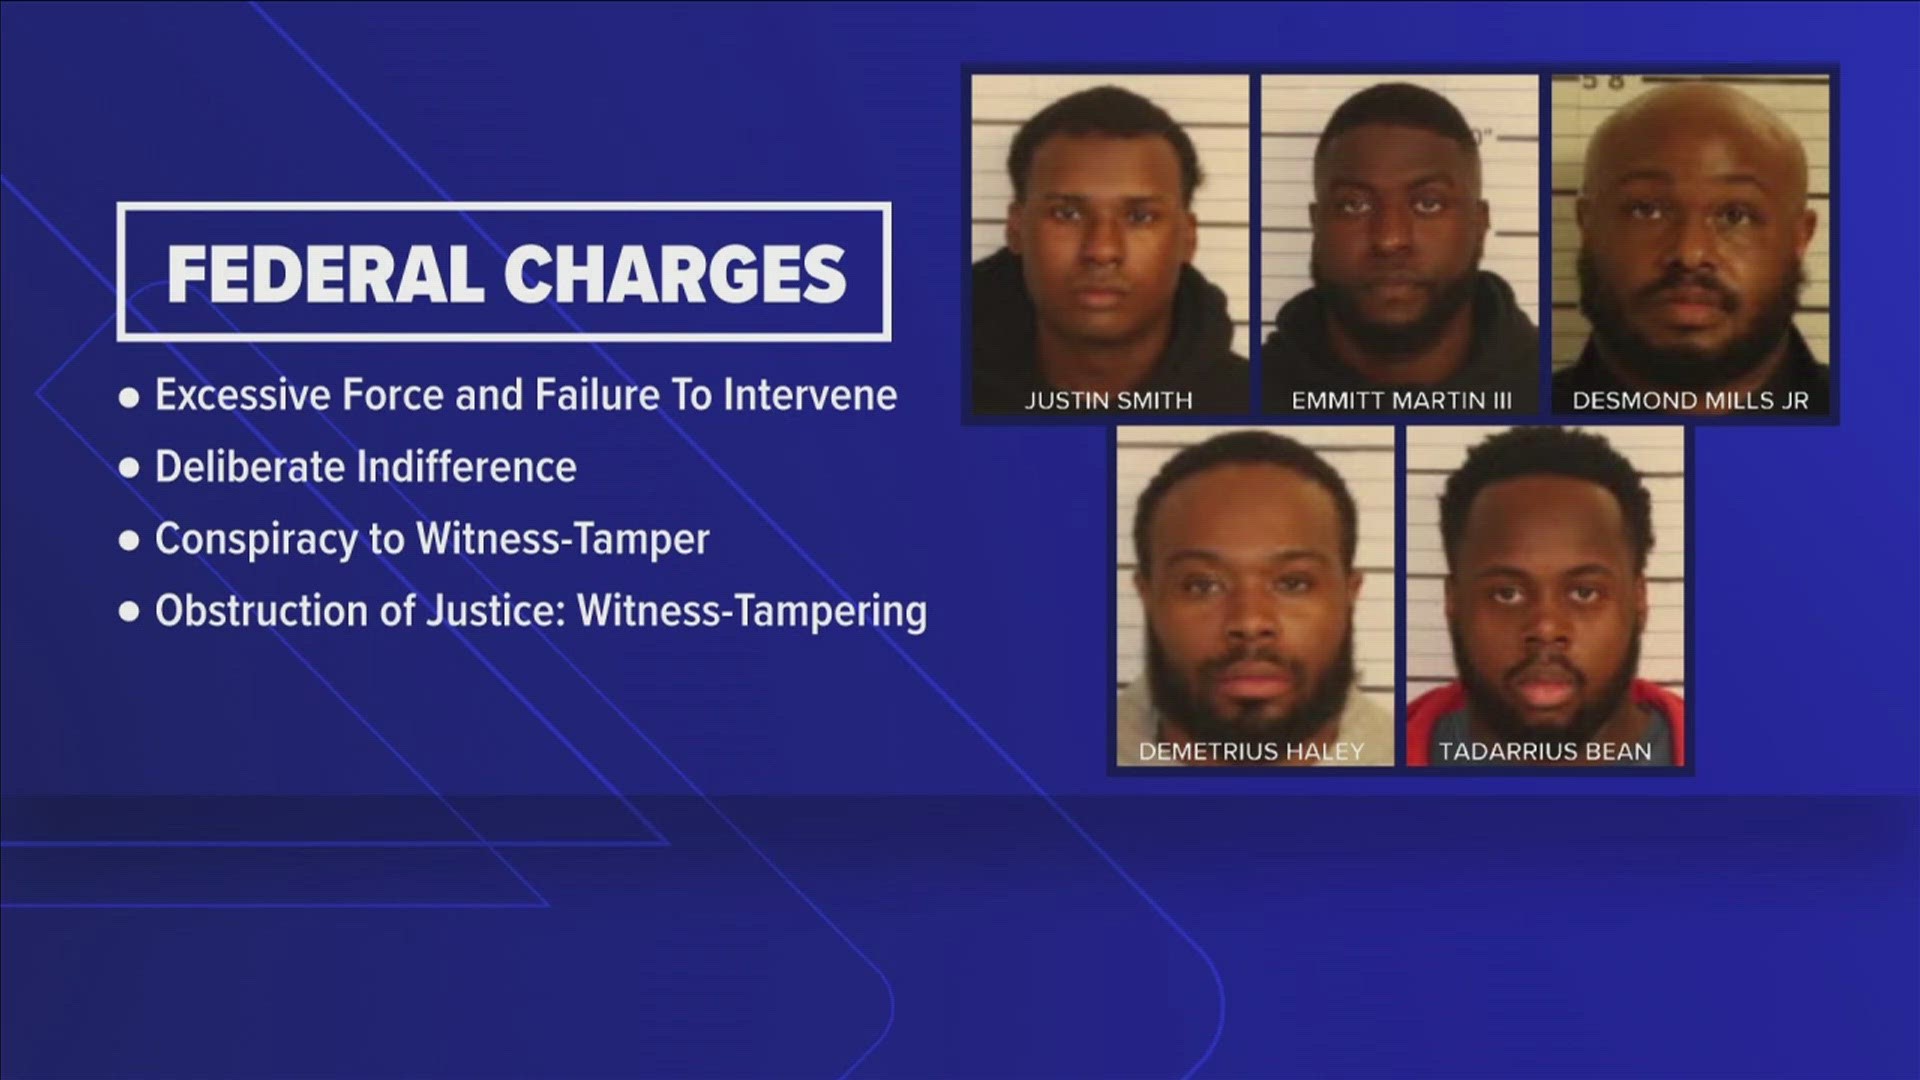 Wednesday, four of the five former Memphis Police officers charged in the death of Tyre Nichols made their first appearance in federal court.